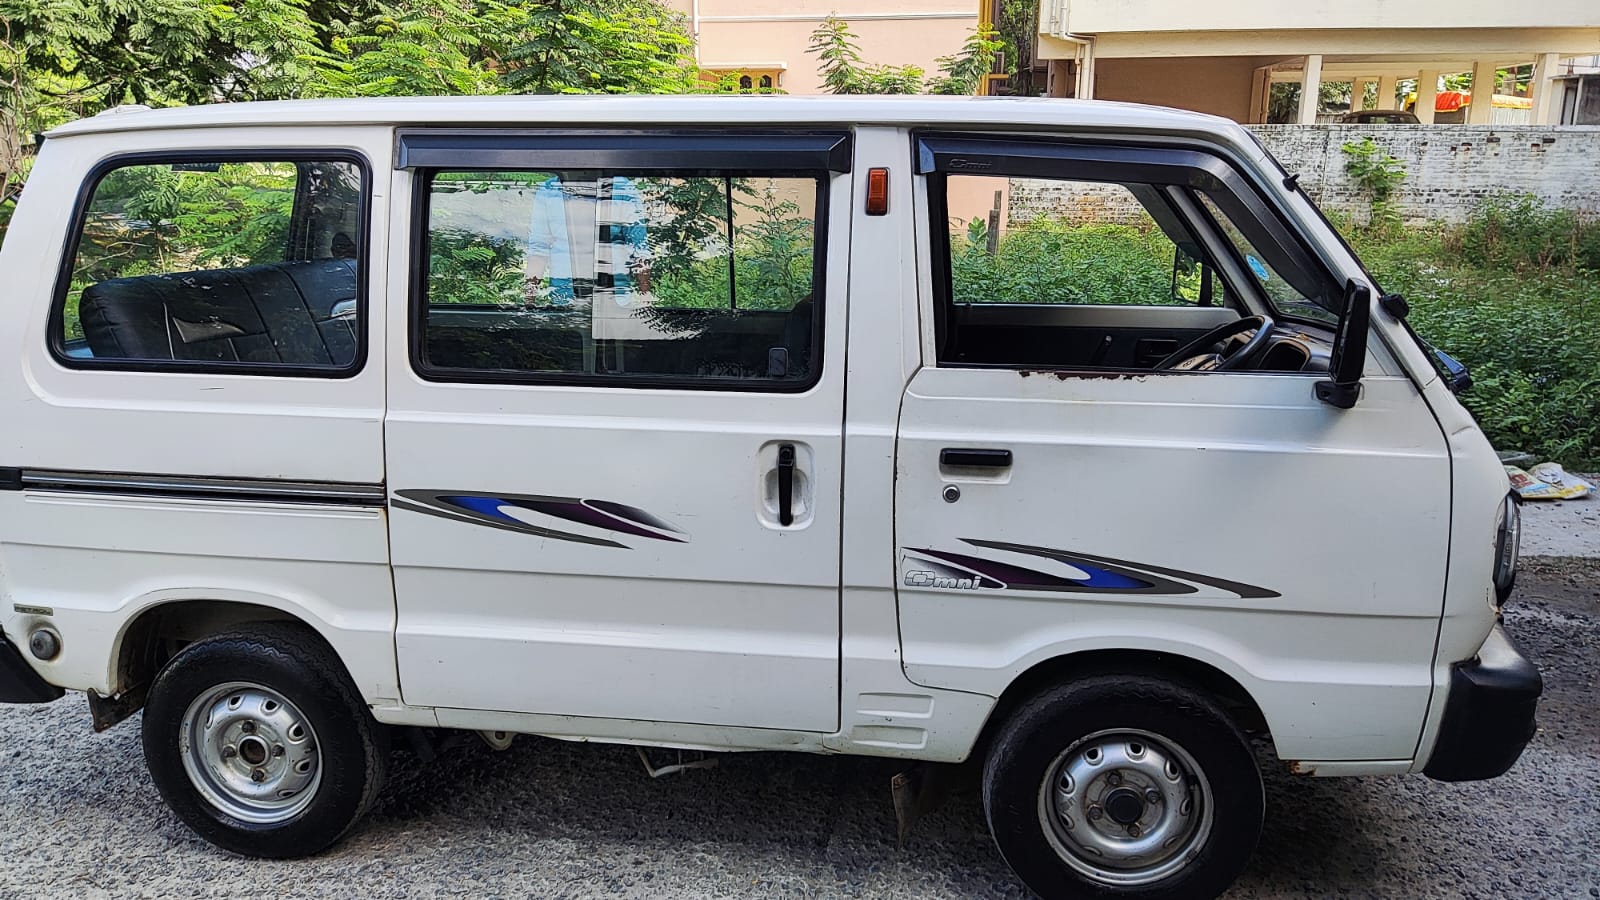 4173-for-sale-Maruthi-Suzuki-Omni-Petrol-First-Owner-2017-TN-registered-rs-270000